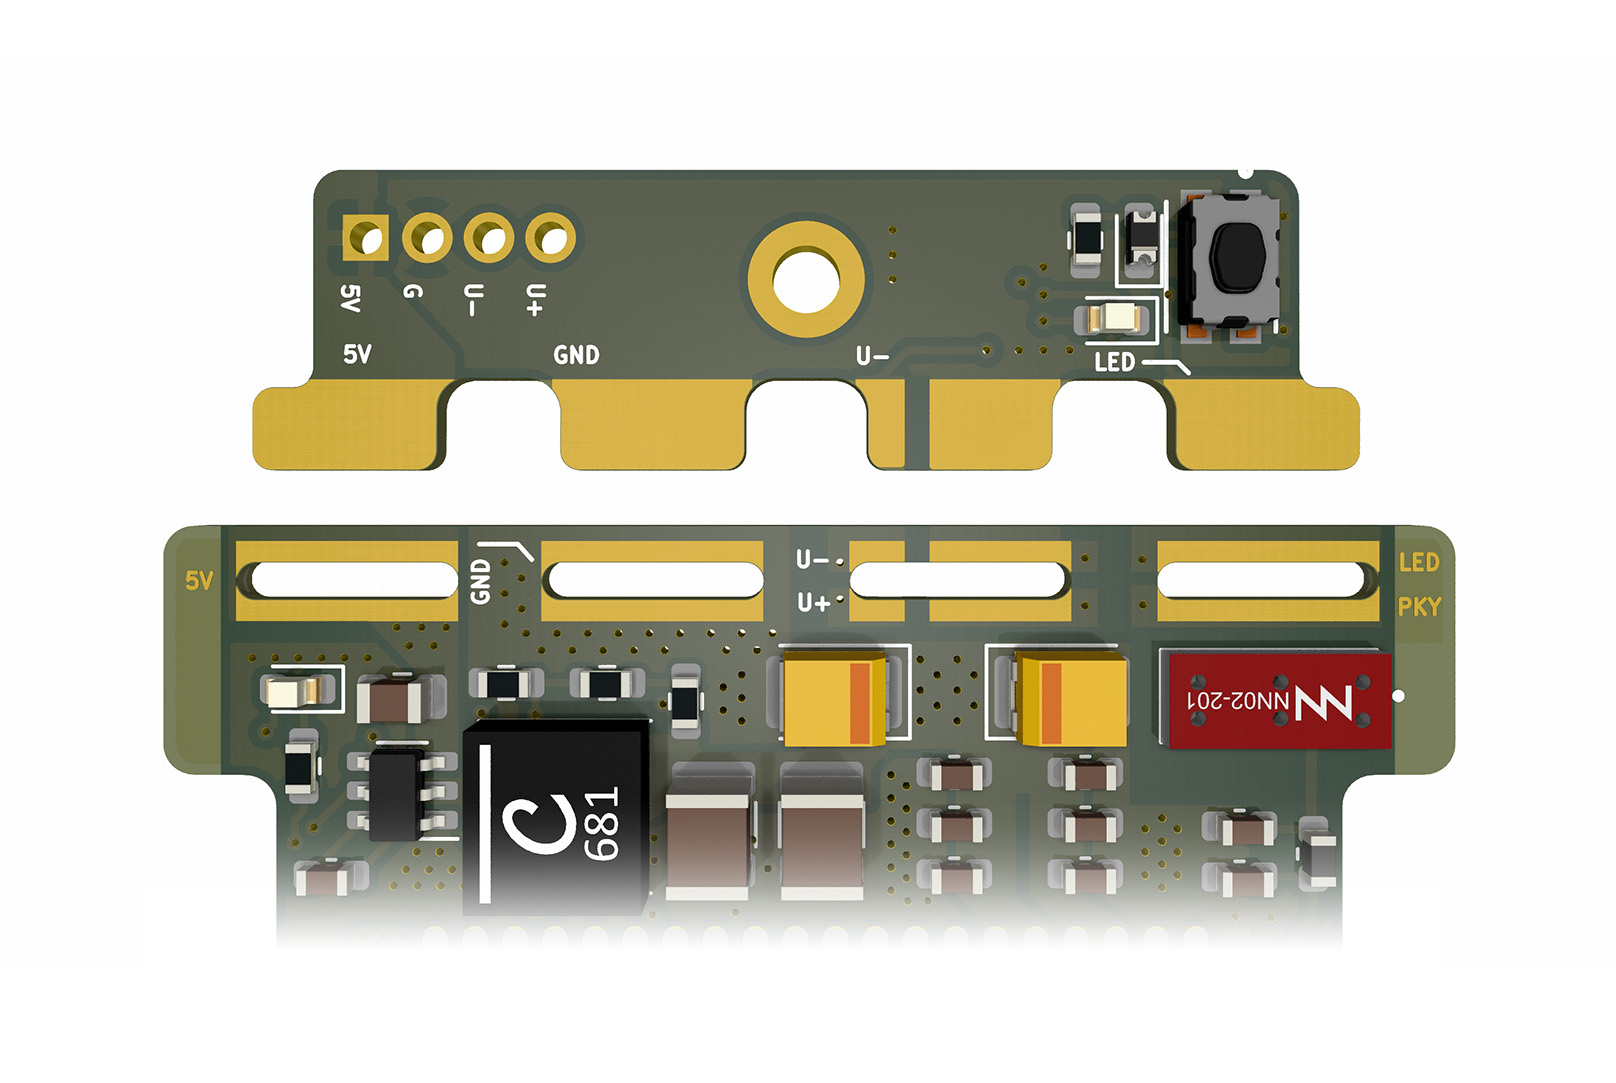 Dovetail-style PCB Joint to join the front panel to the main PCBA